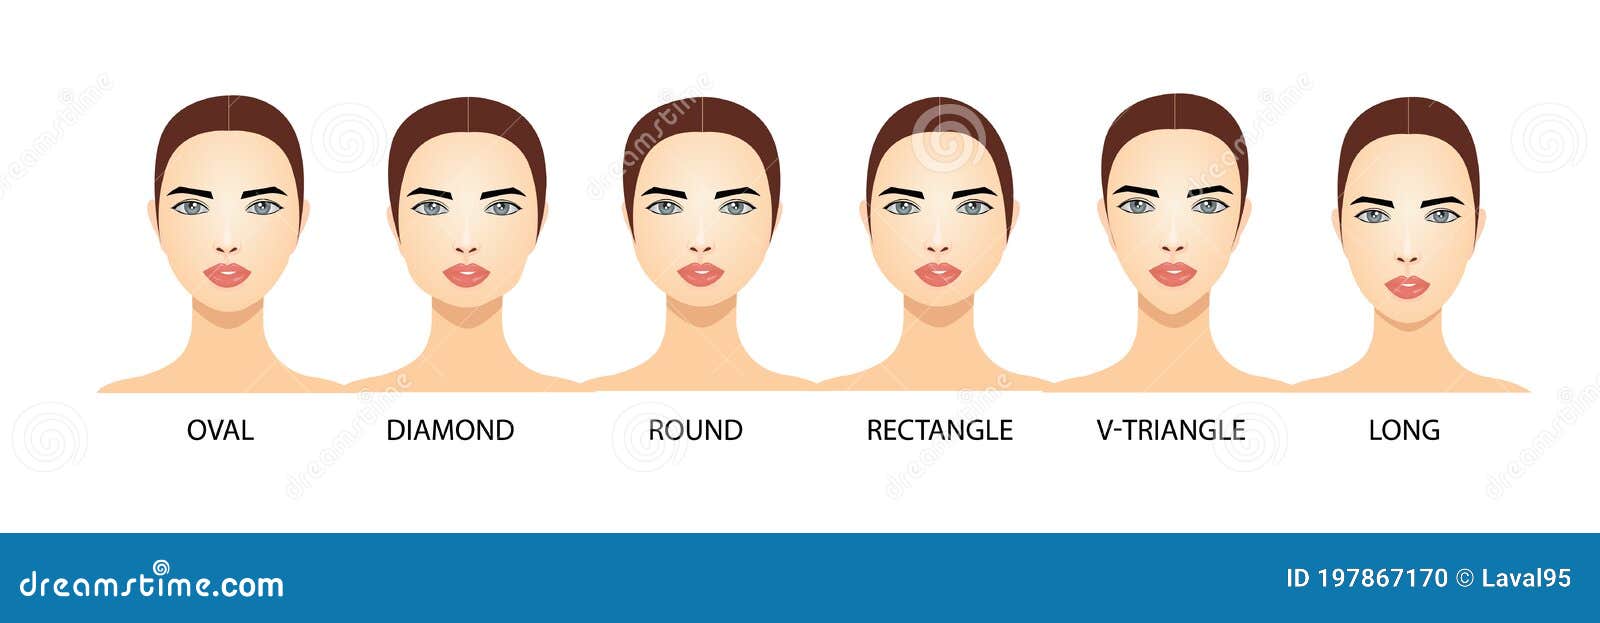 Set of Different Female Face Shapes on a White Background Stock Vector ...